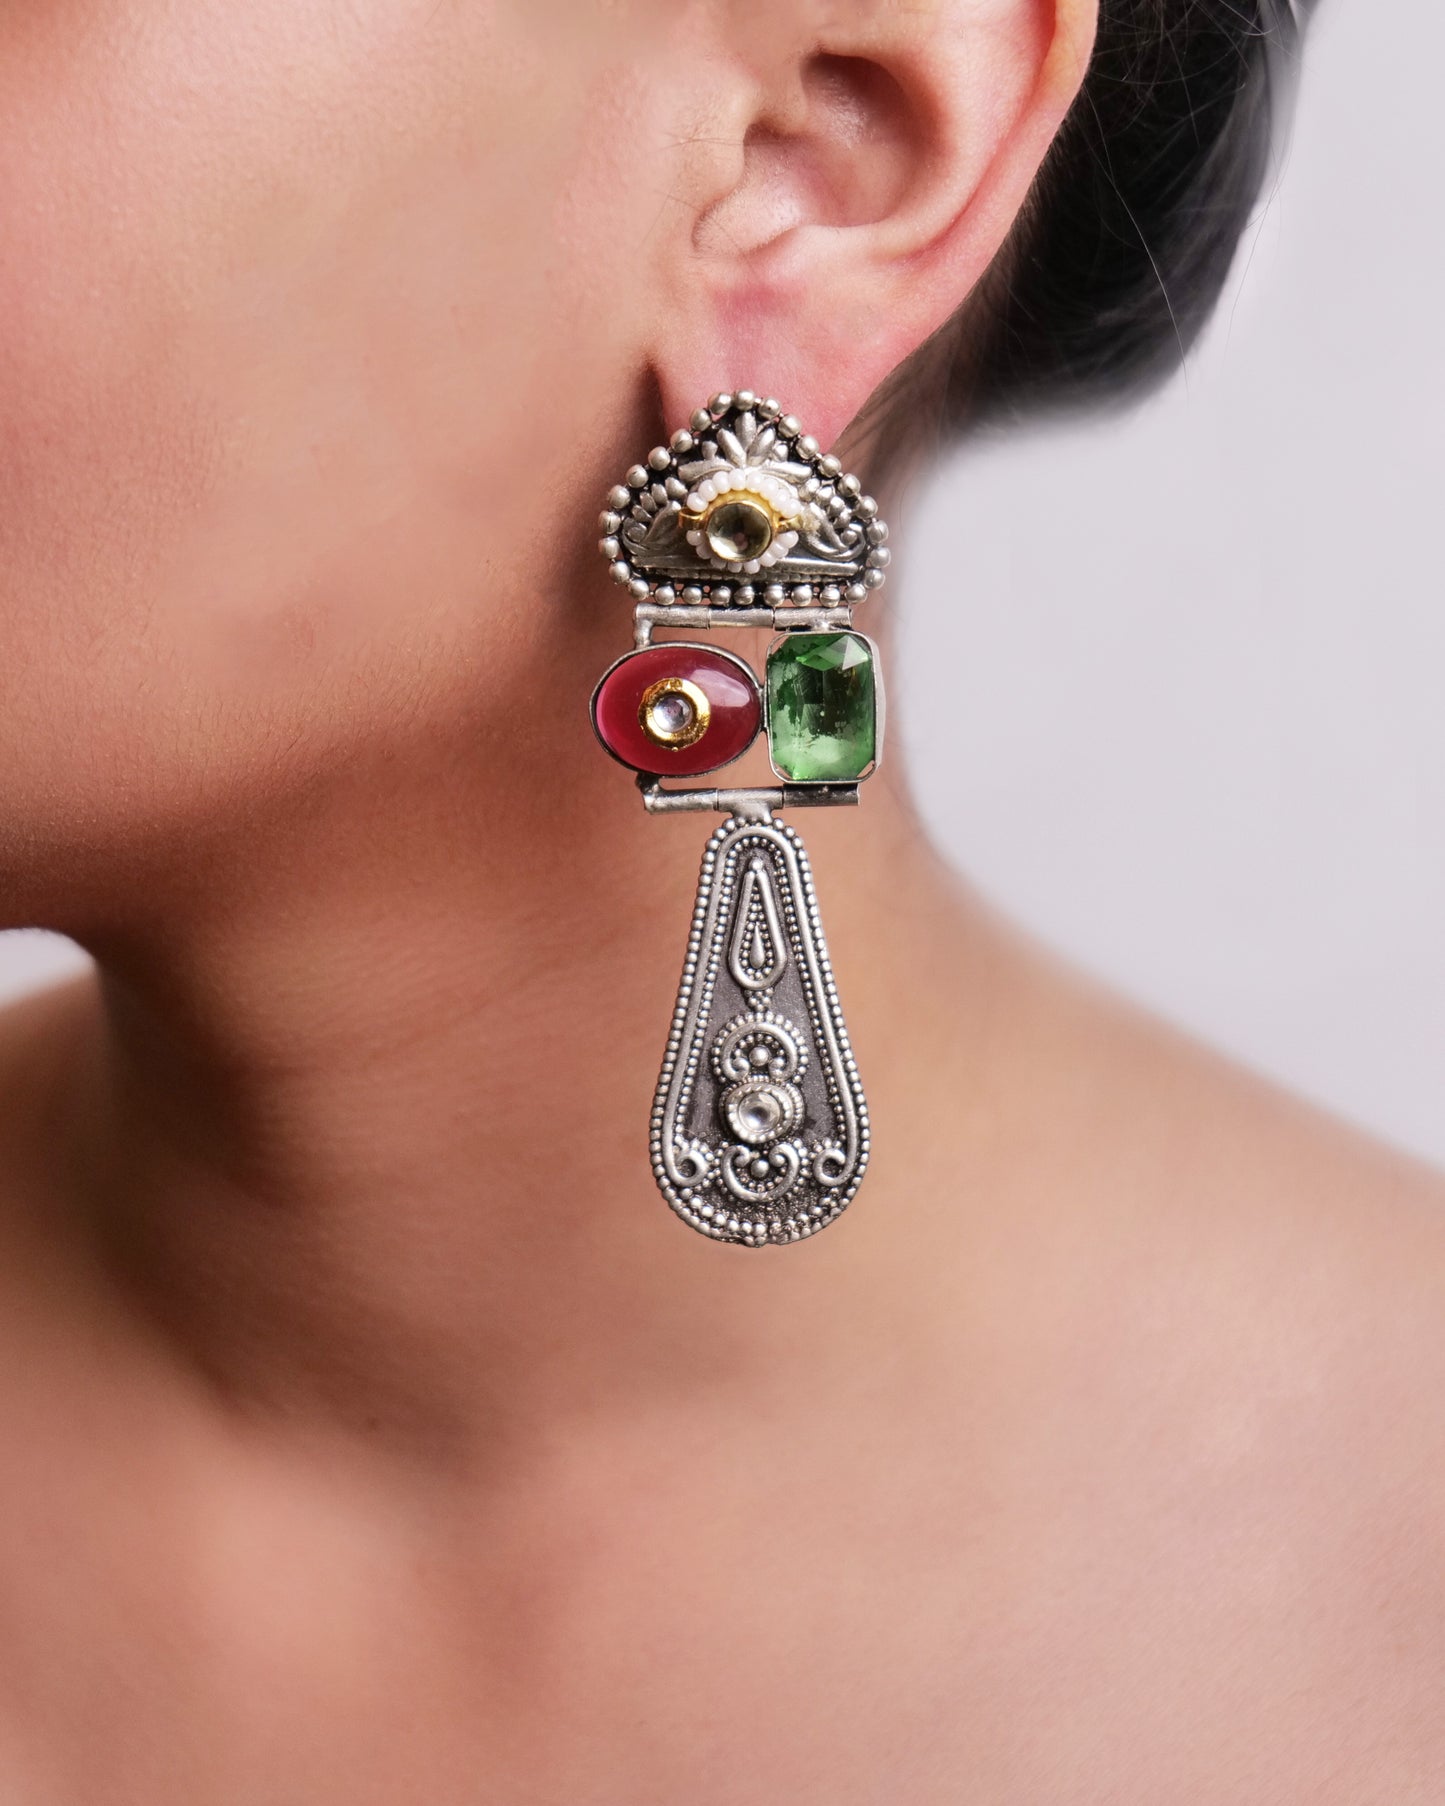 Silver beauties in red and green stones